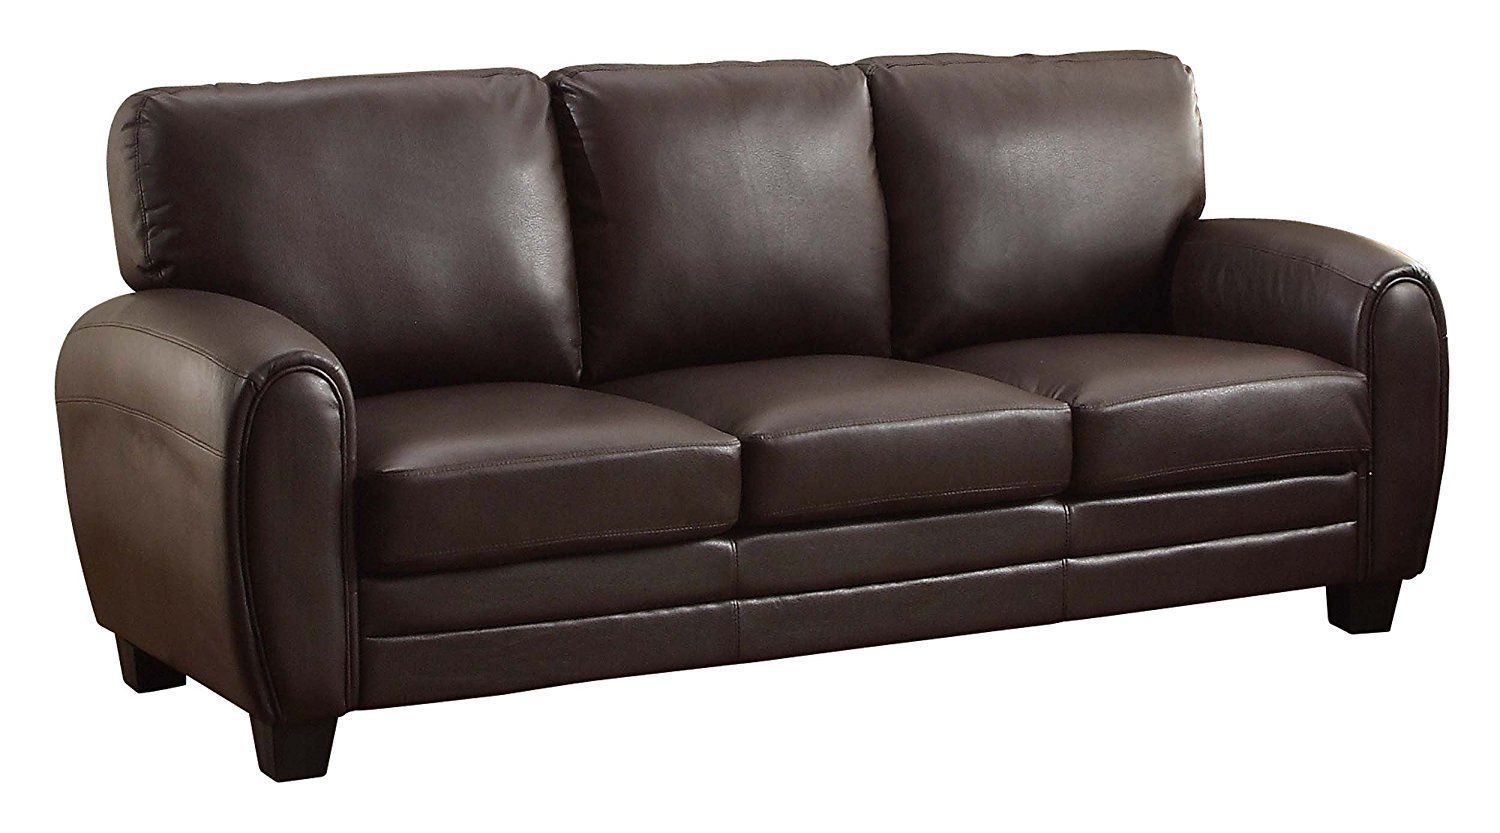 Brown Faux Leather Couch – Home Furniture Design In Faux Leather Sofas In Dark Brown (View 3 of 20)